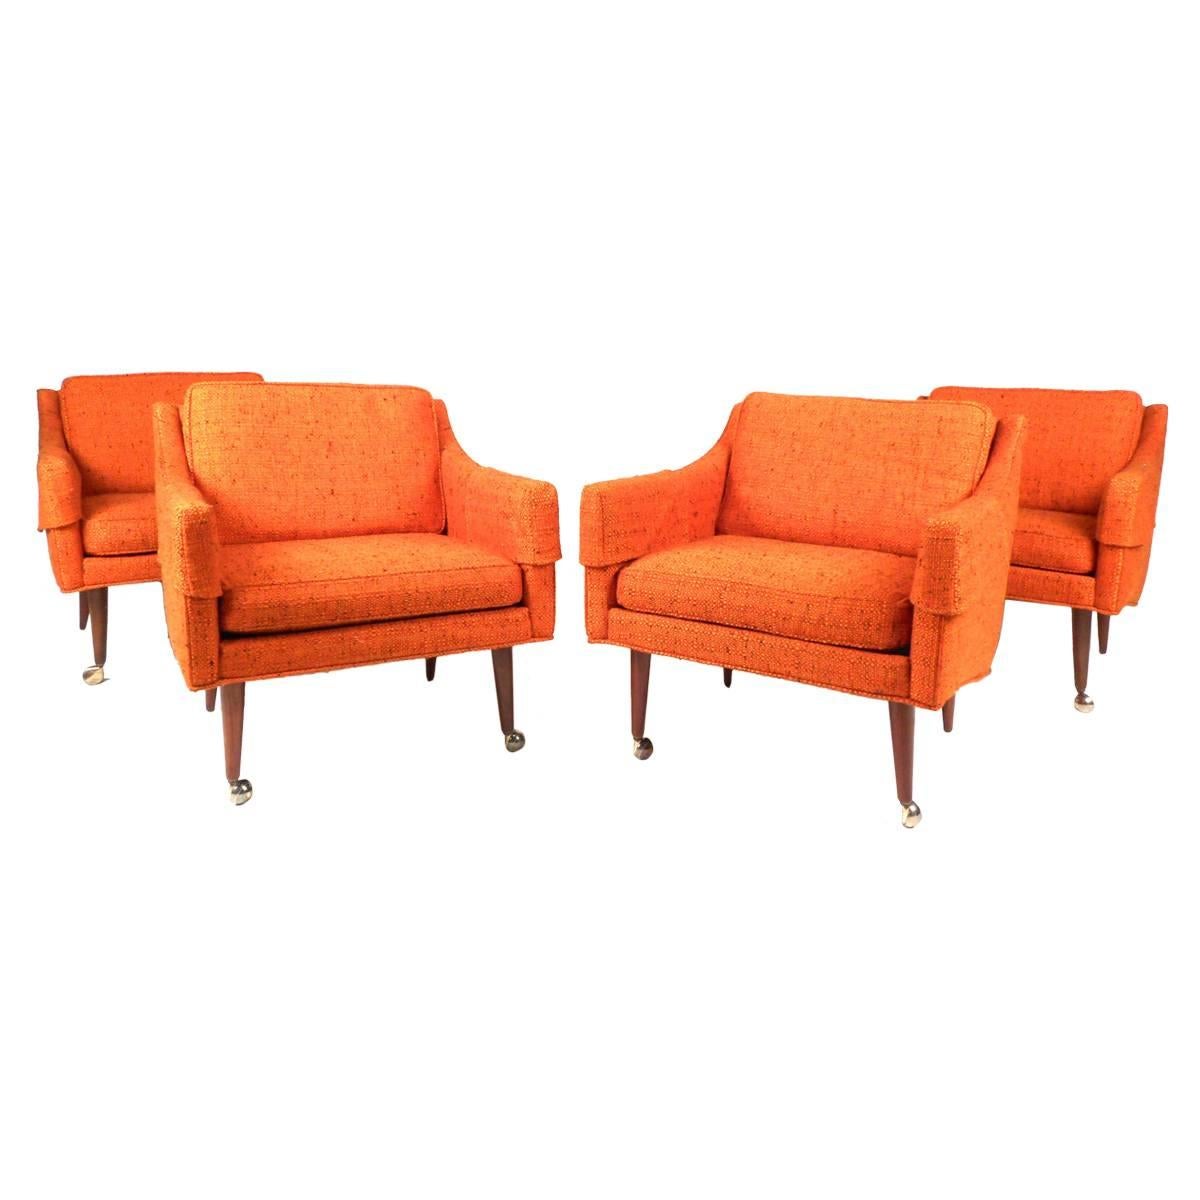 Set of Milo Baughman Lounge Chairs for Thayer Coggin